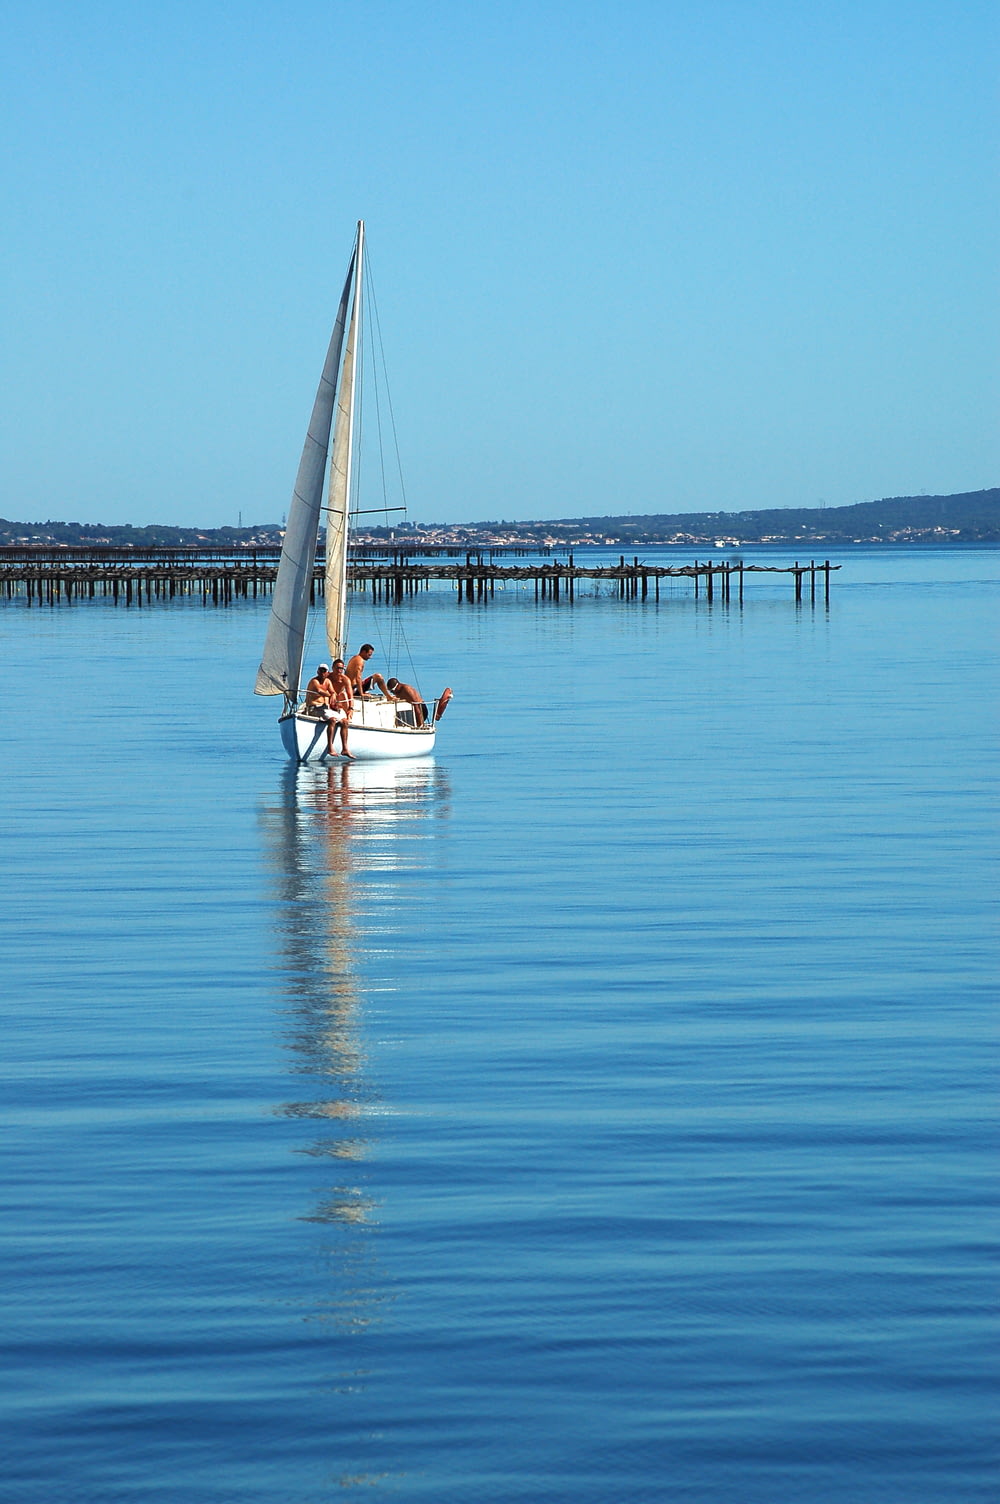 a sailboat with three people on it in the water